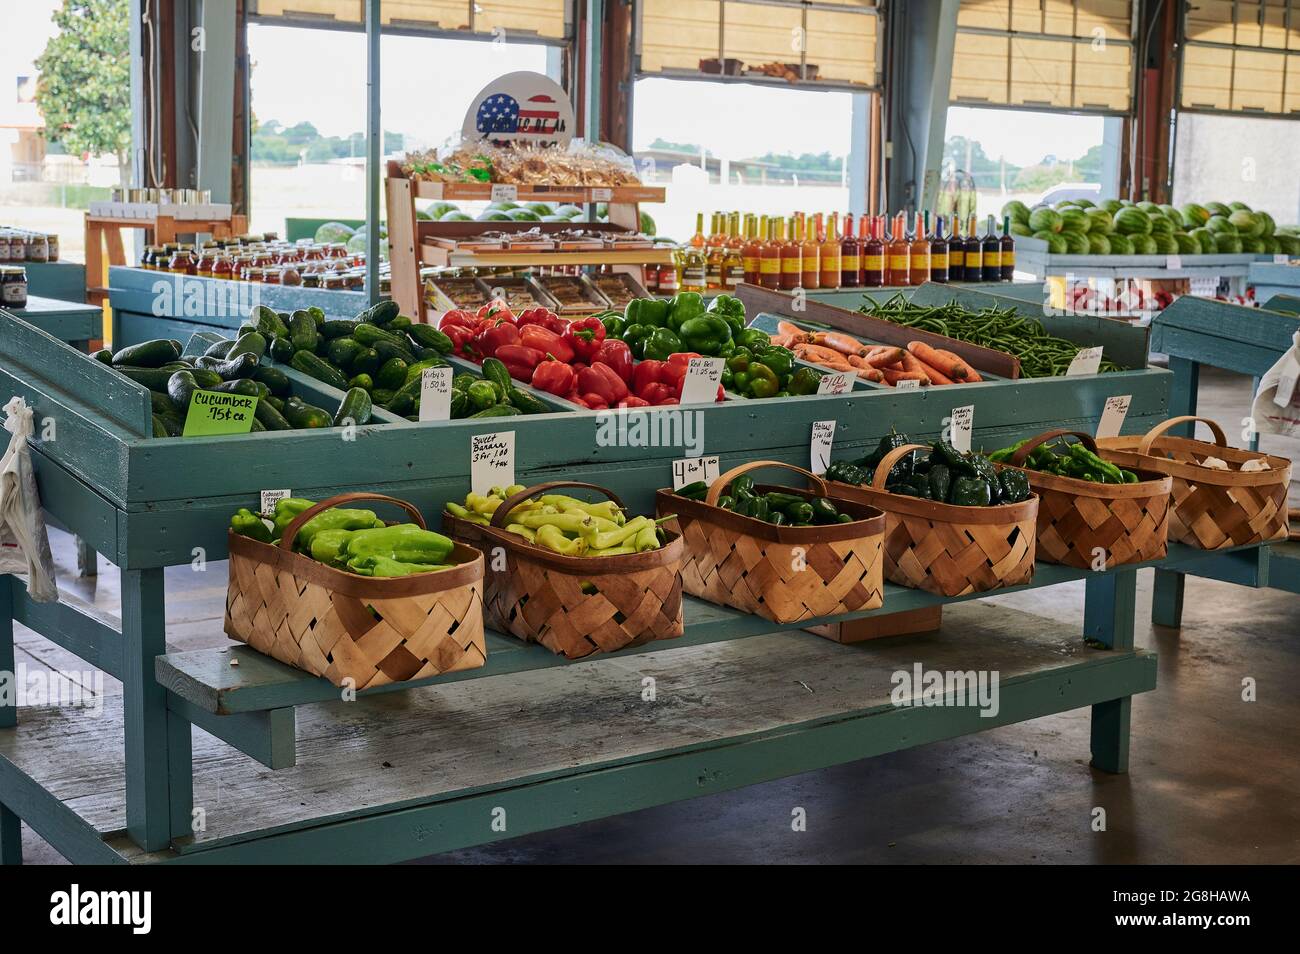 Fresh fruits, vegetables and produce on sale at a local farmers or farm market, in Montgomery, Alabama, USA. Stock Photo